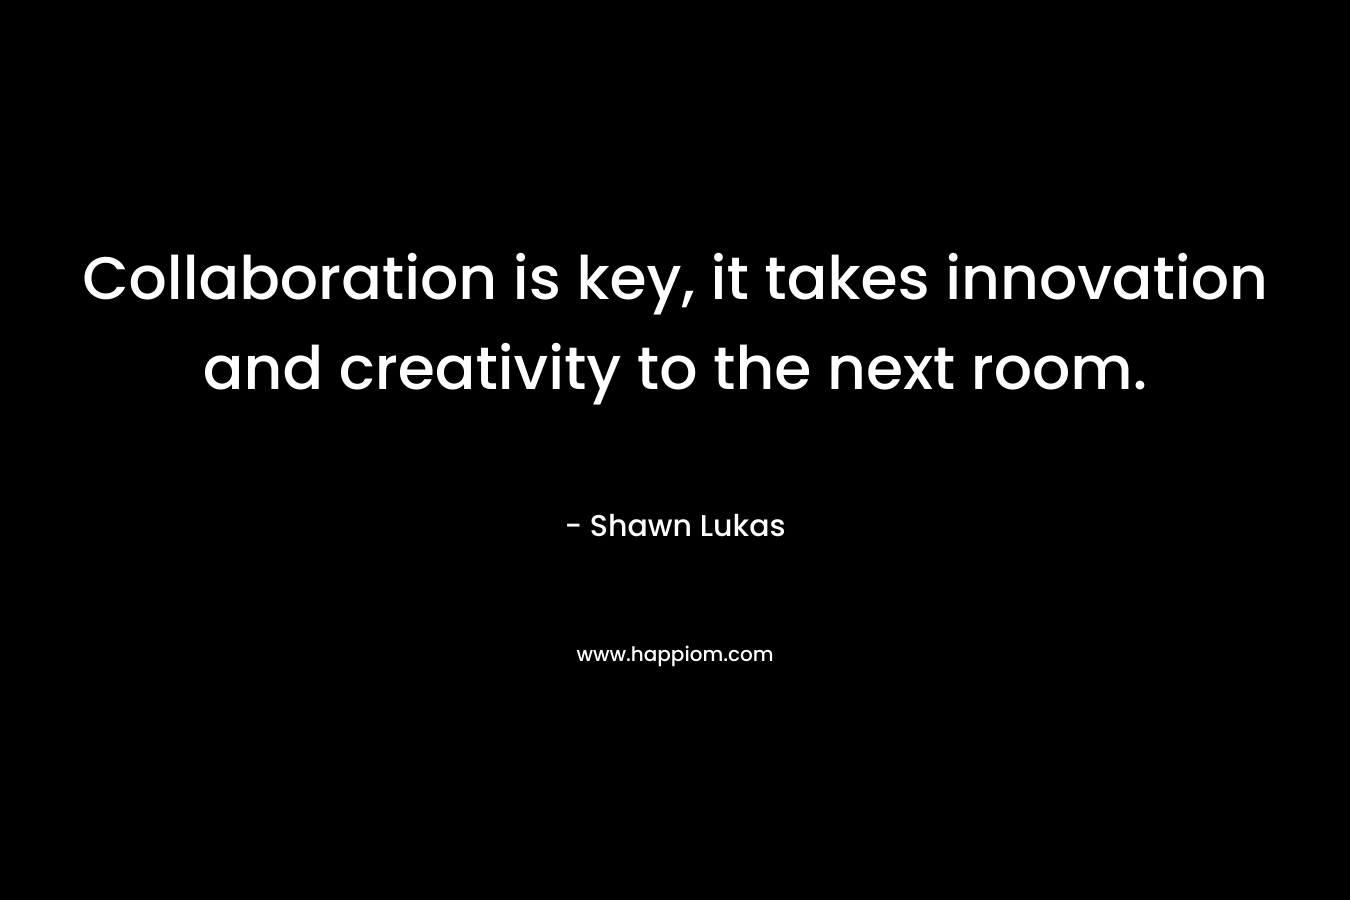 Collaboration is key, it takes innovation and creativity to the next room.